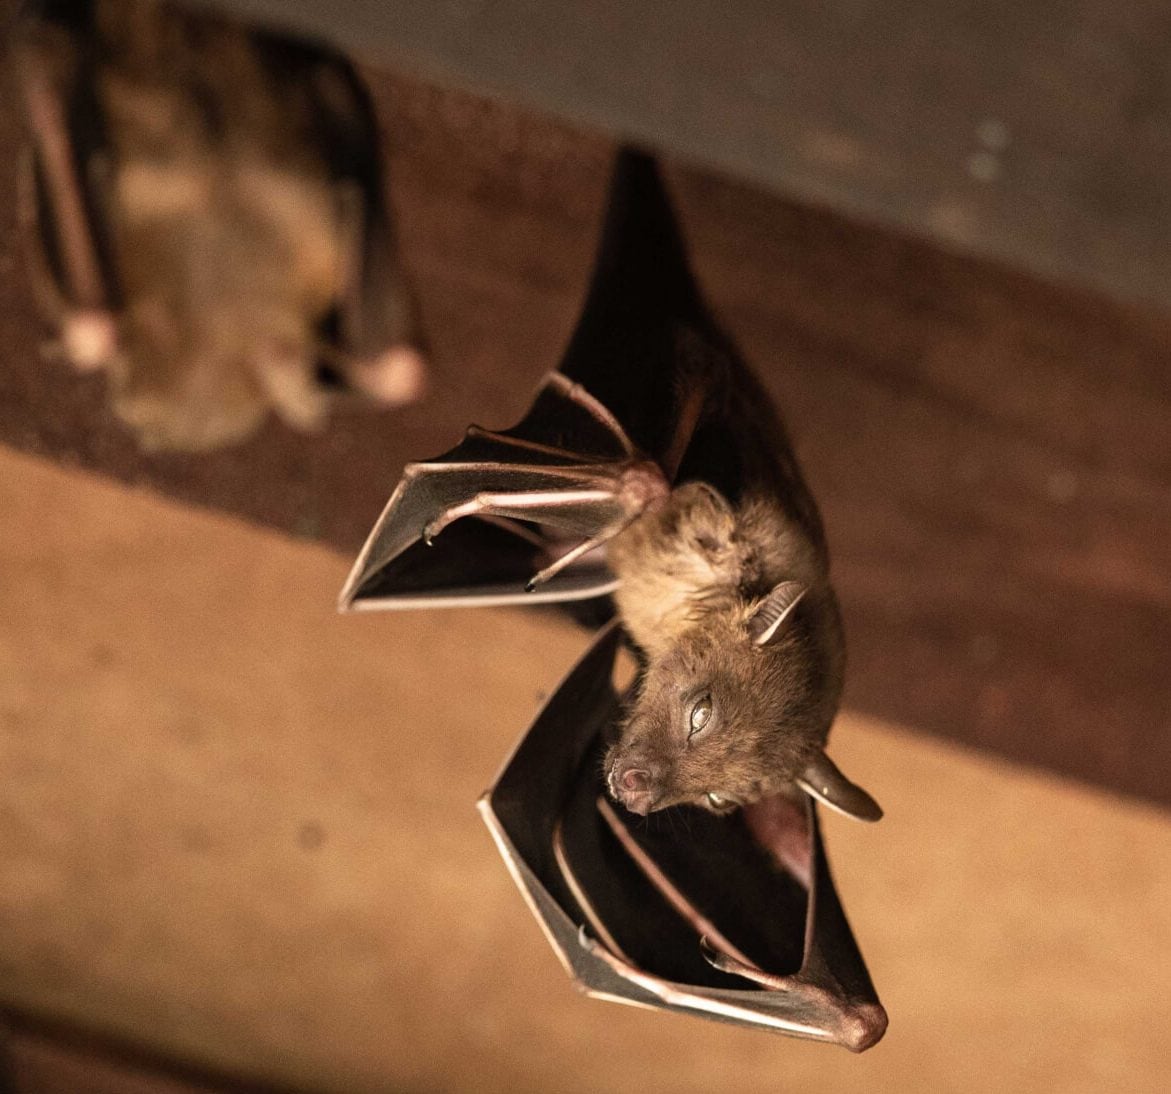 Expert bat removal services for a safe and humane solution in San Diego